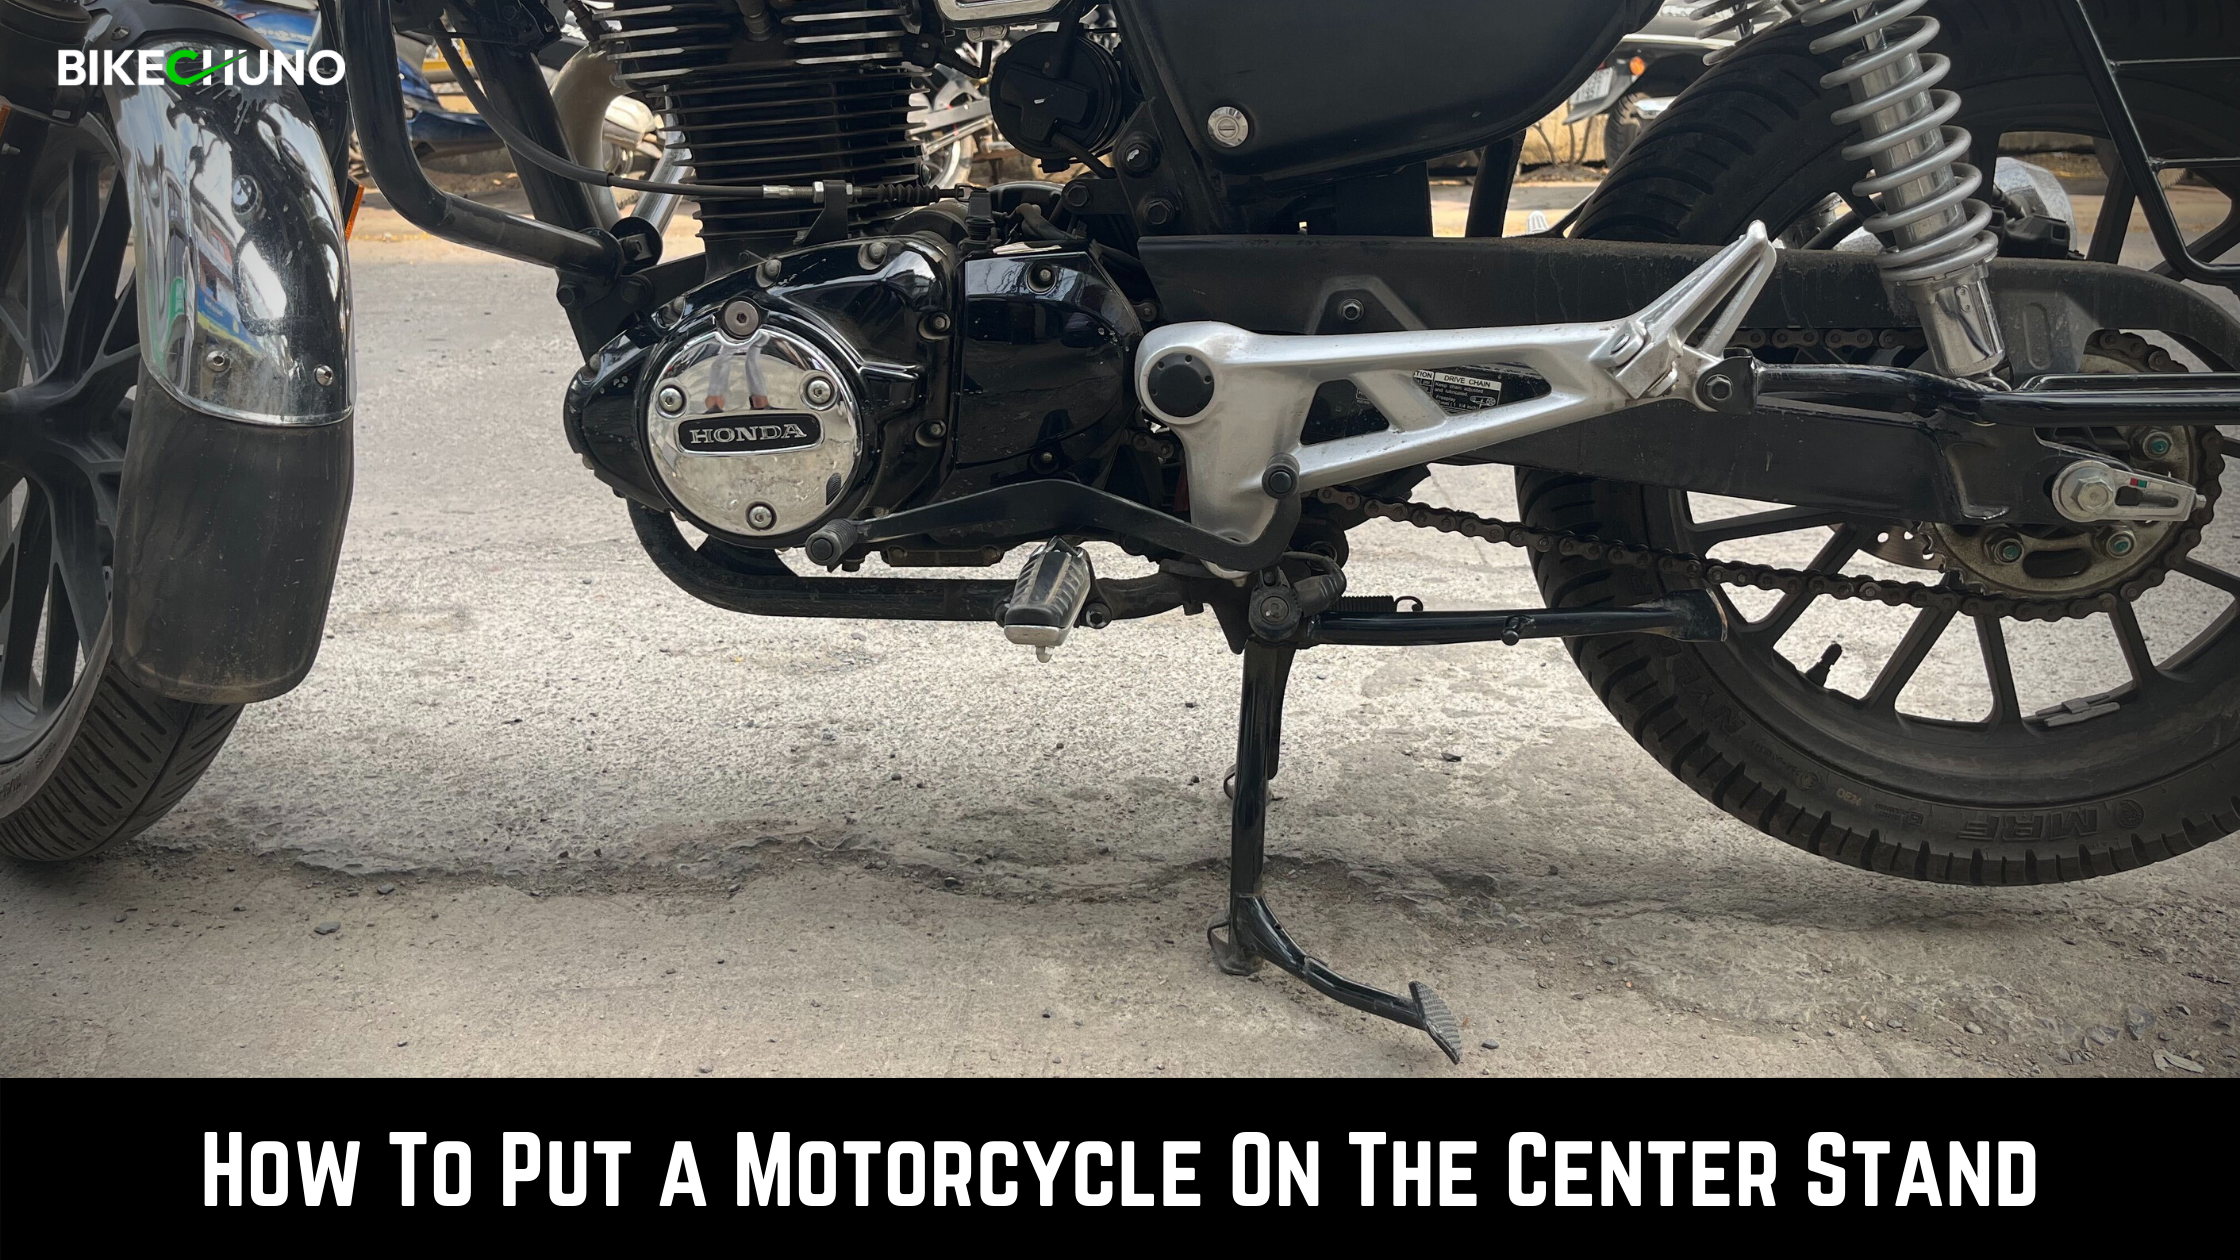 How To Put a Motorcycle On The Center Stand